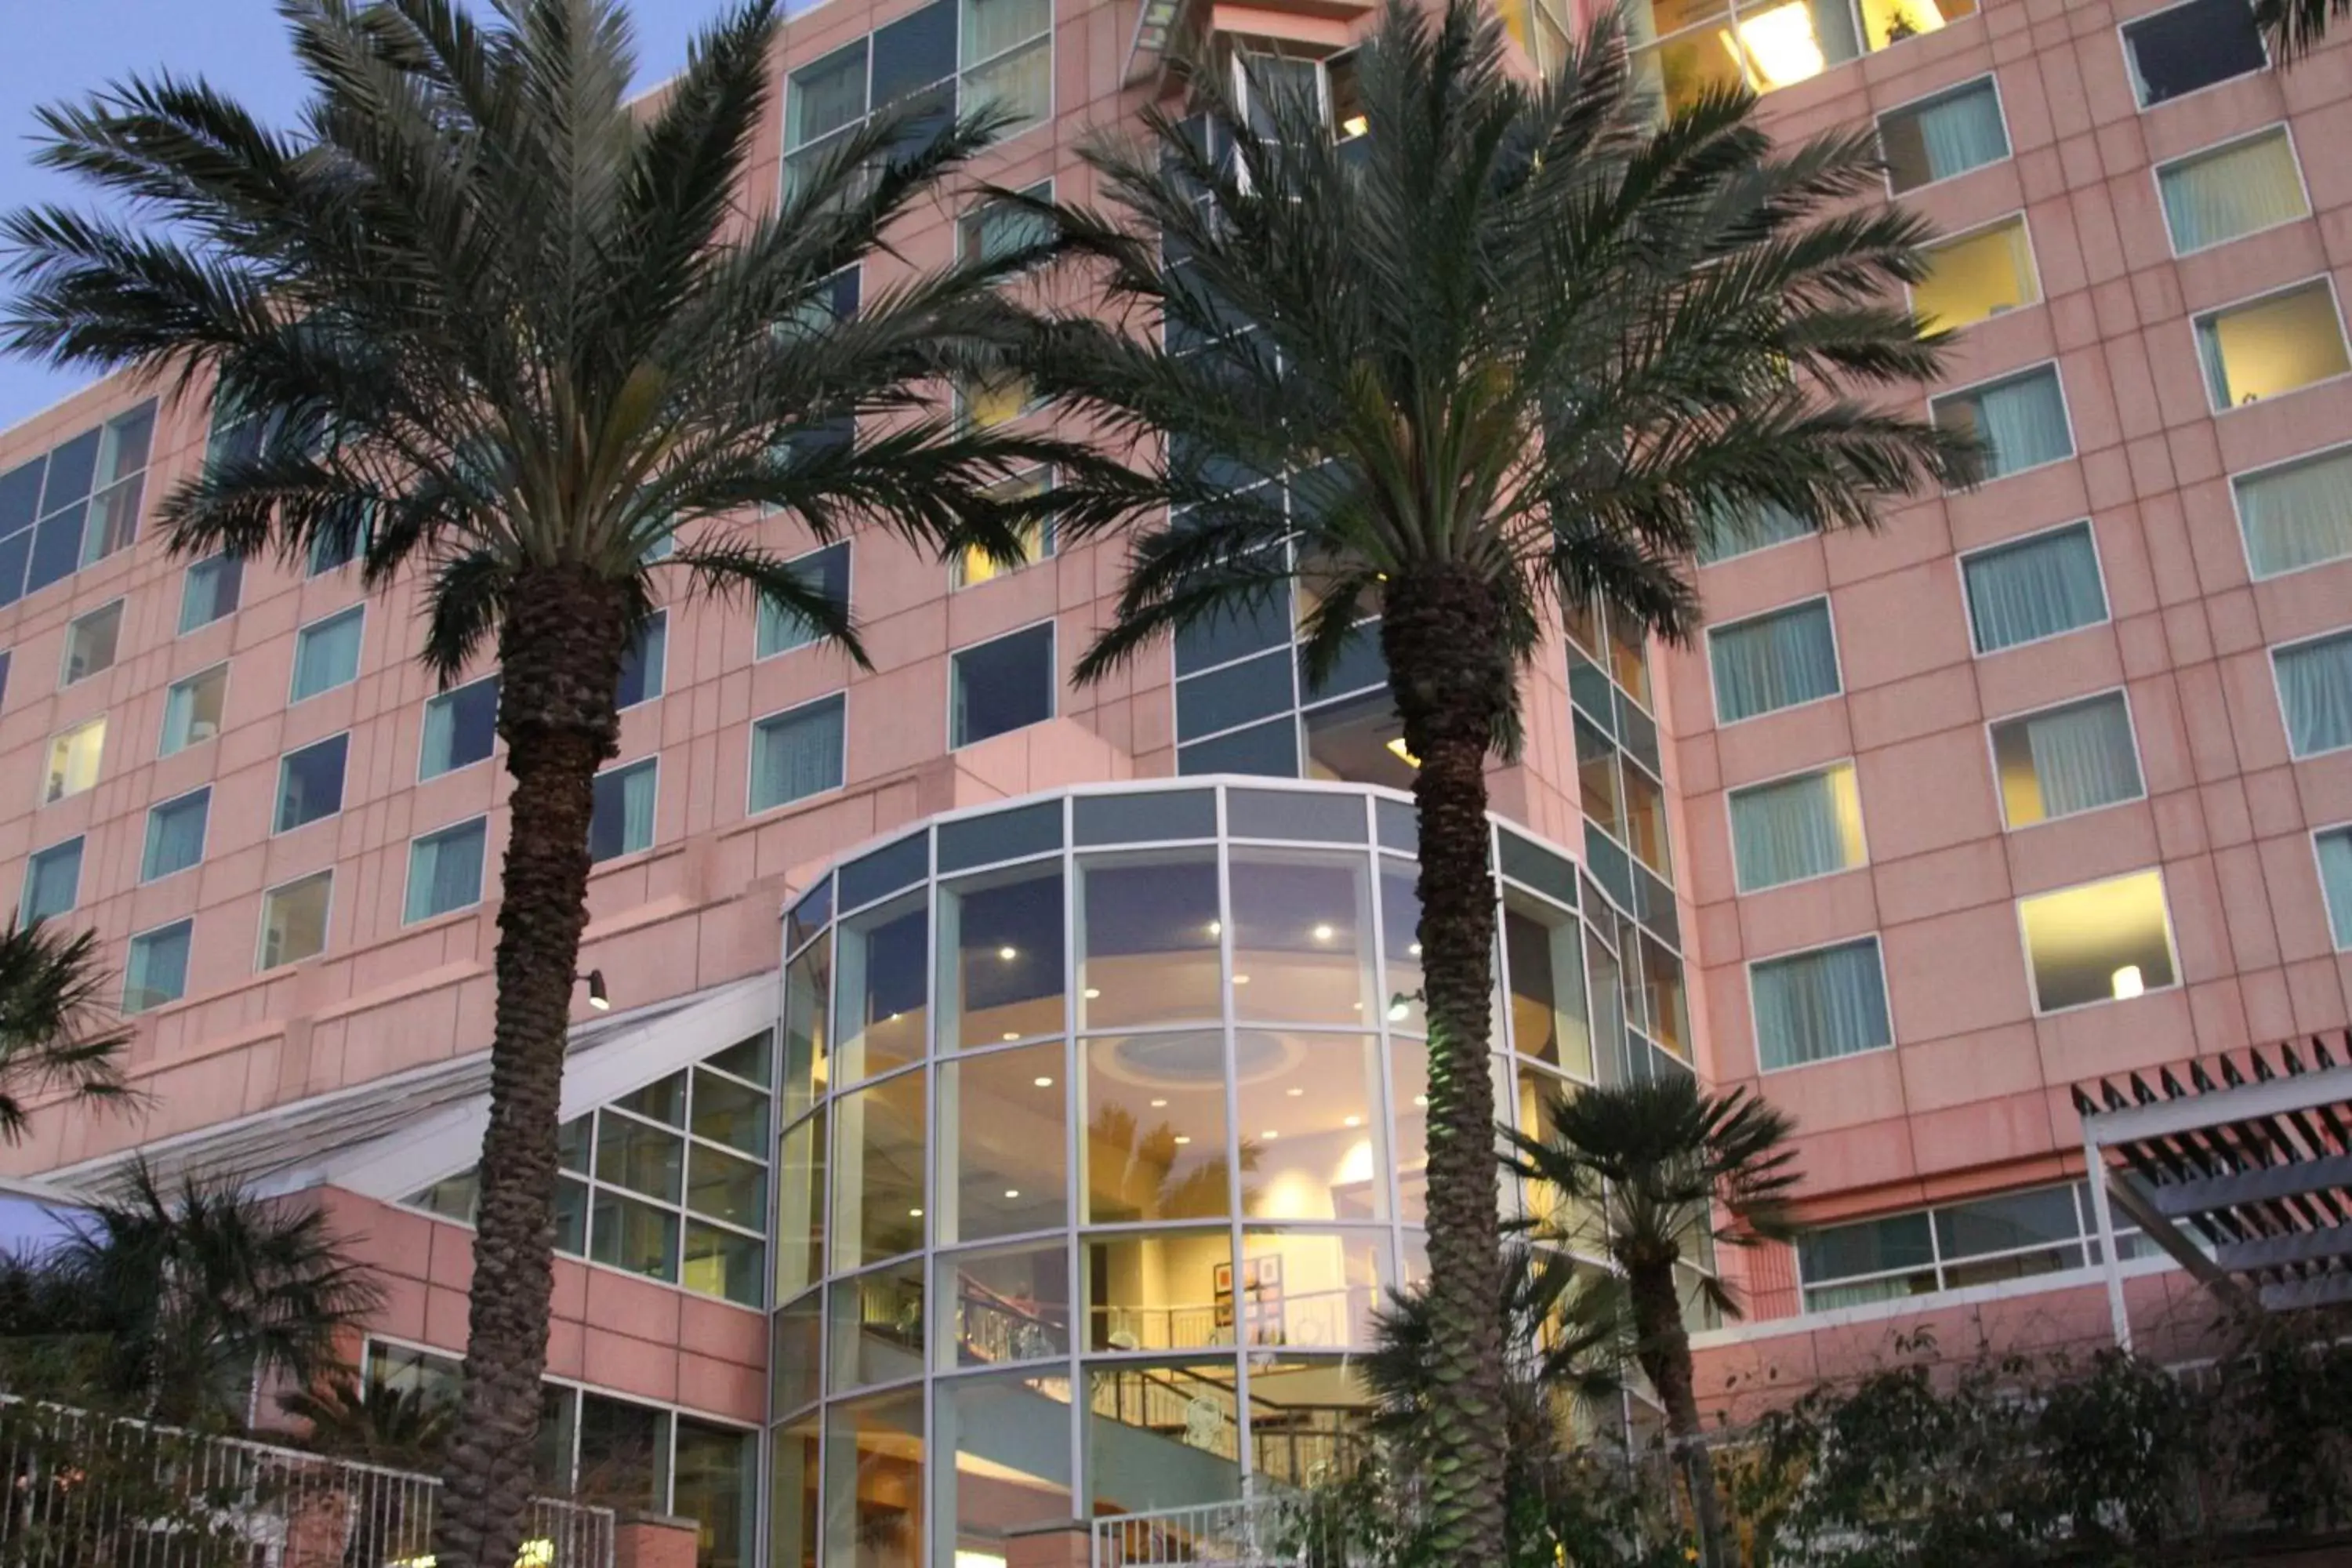 Property building, Facade/Entrance in Moody Gardens Hotel, Spa and Convention Center